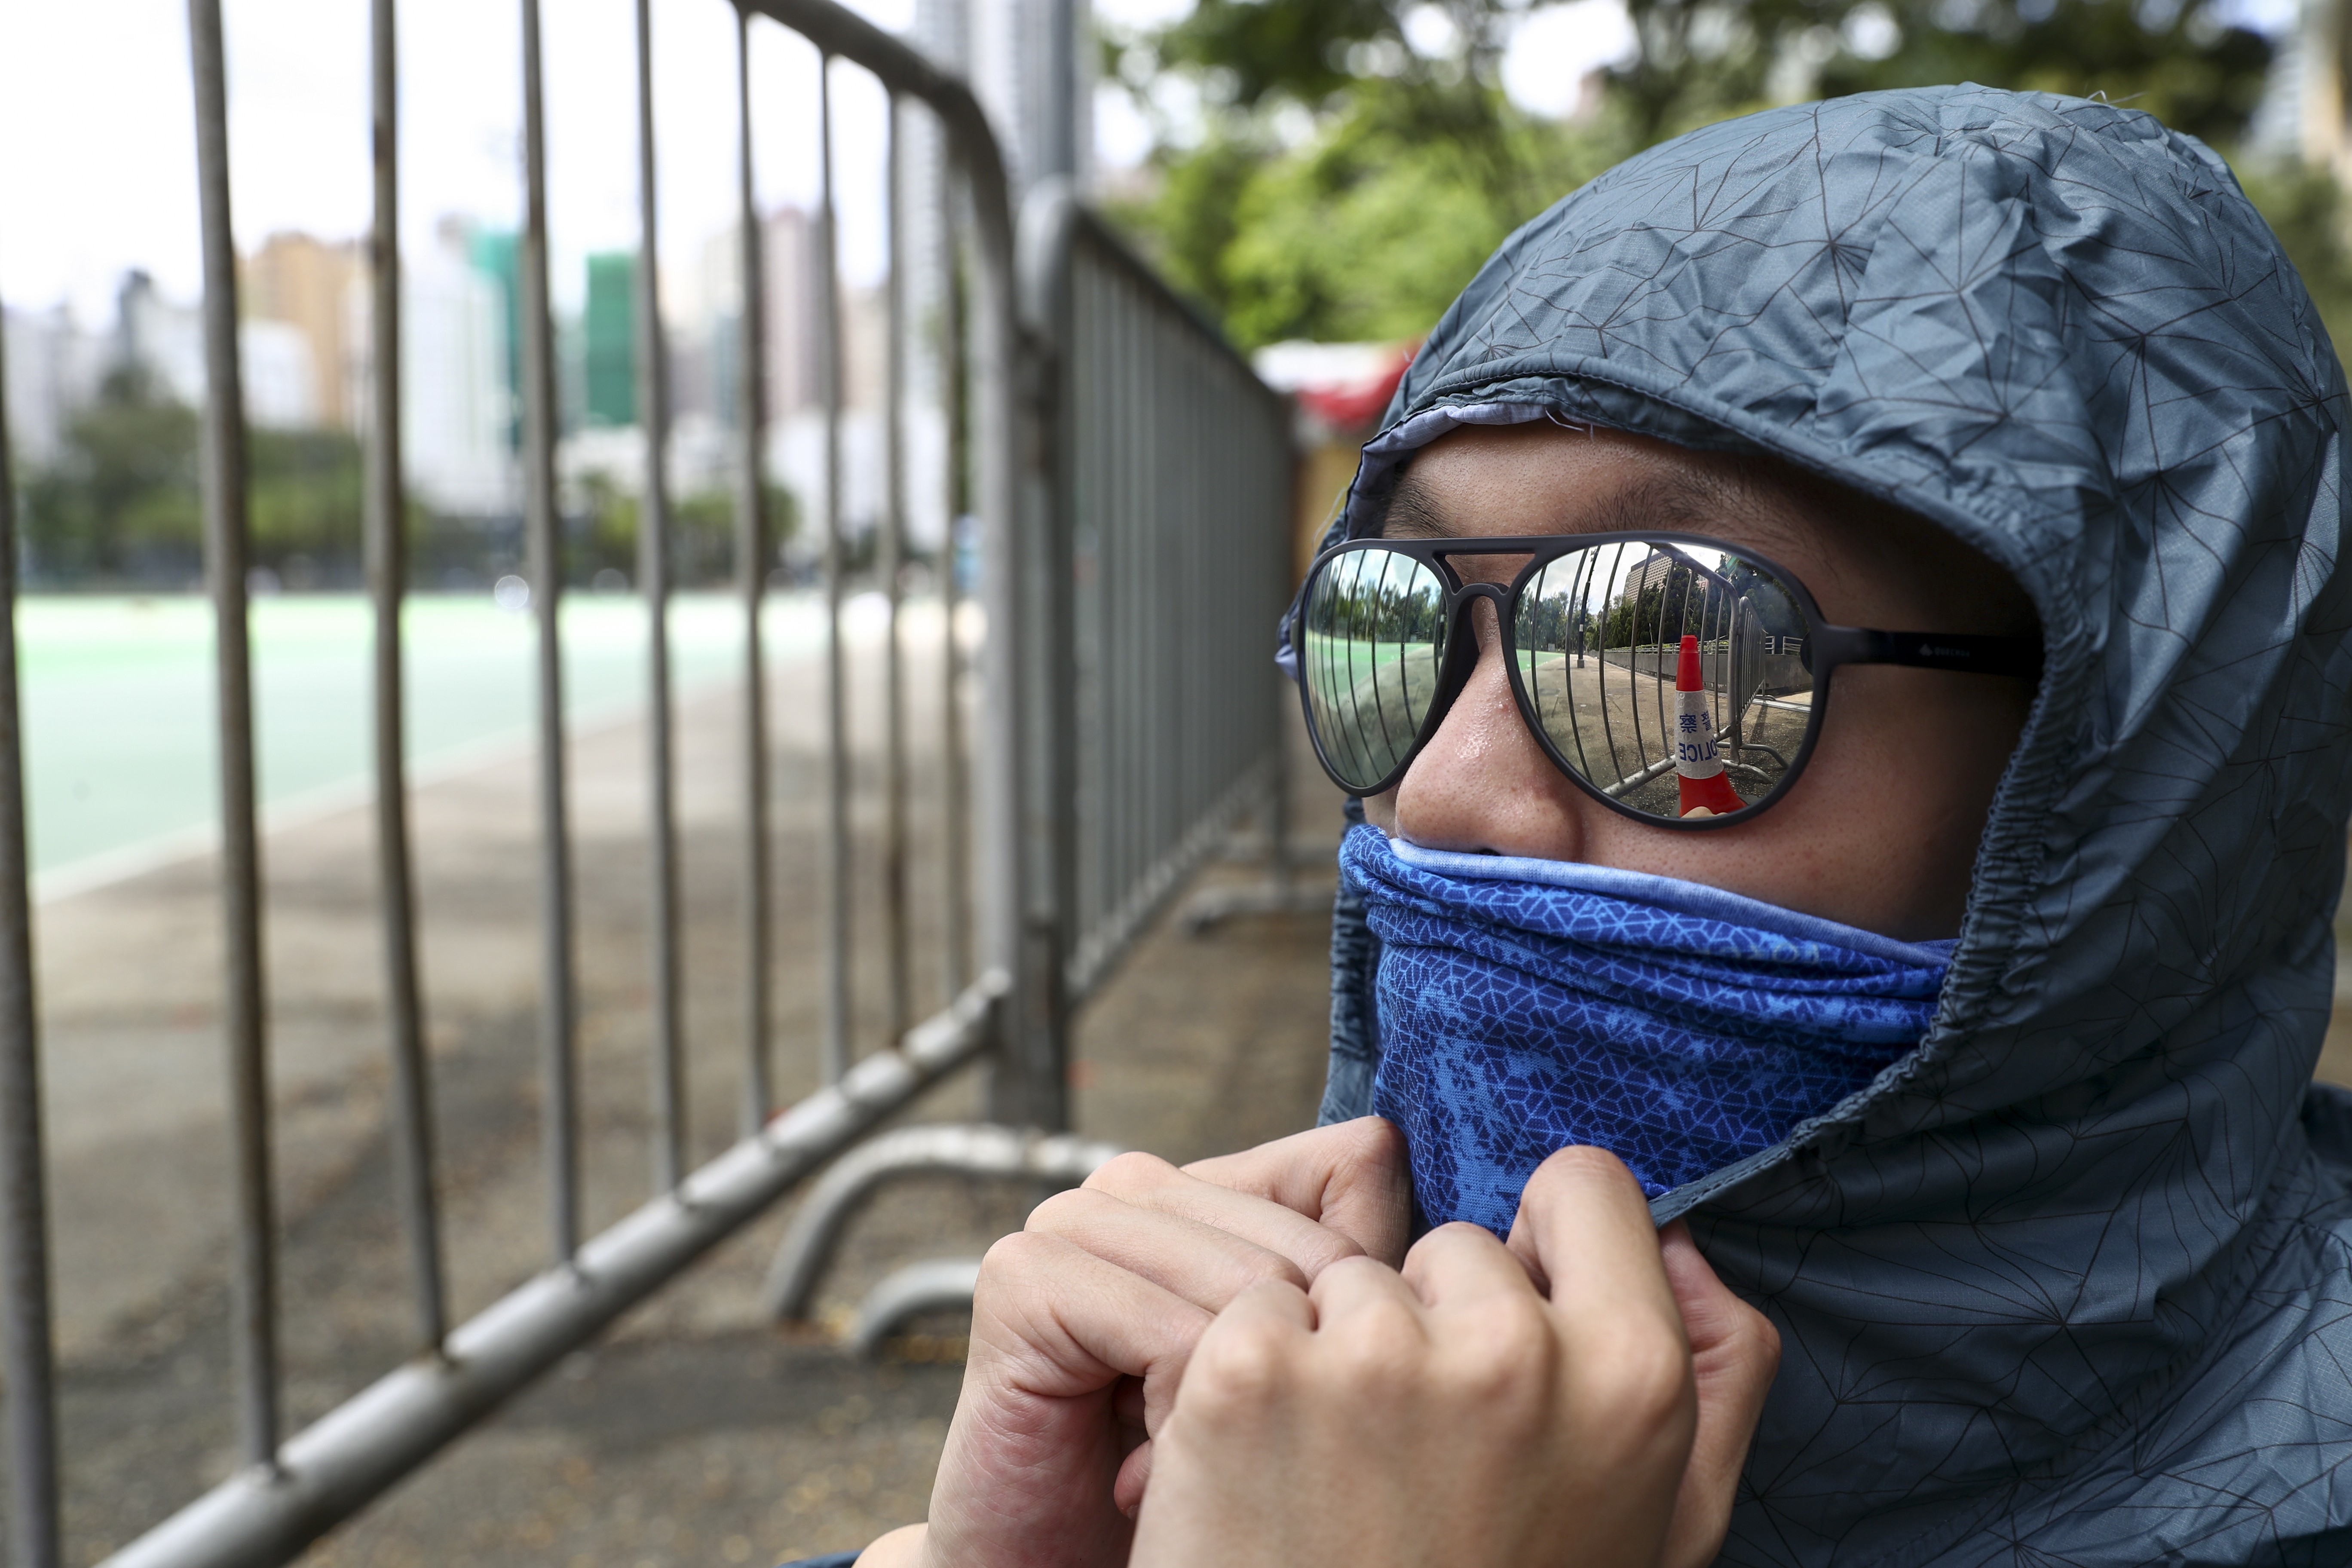 A young protester, who gave his name as “Ah Yuen,” was arrested for rioting on June 12 for being part of the violent clashes that day in Admiralty. Photo: Nora Tam